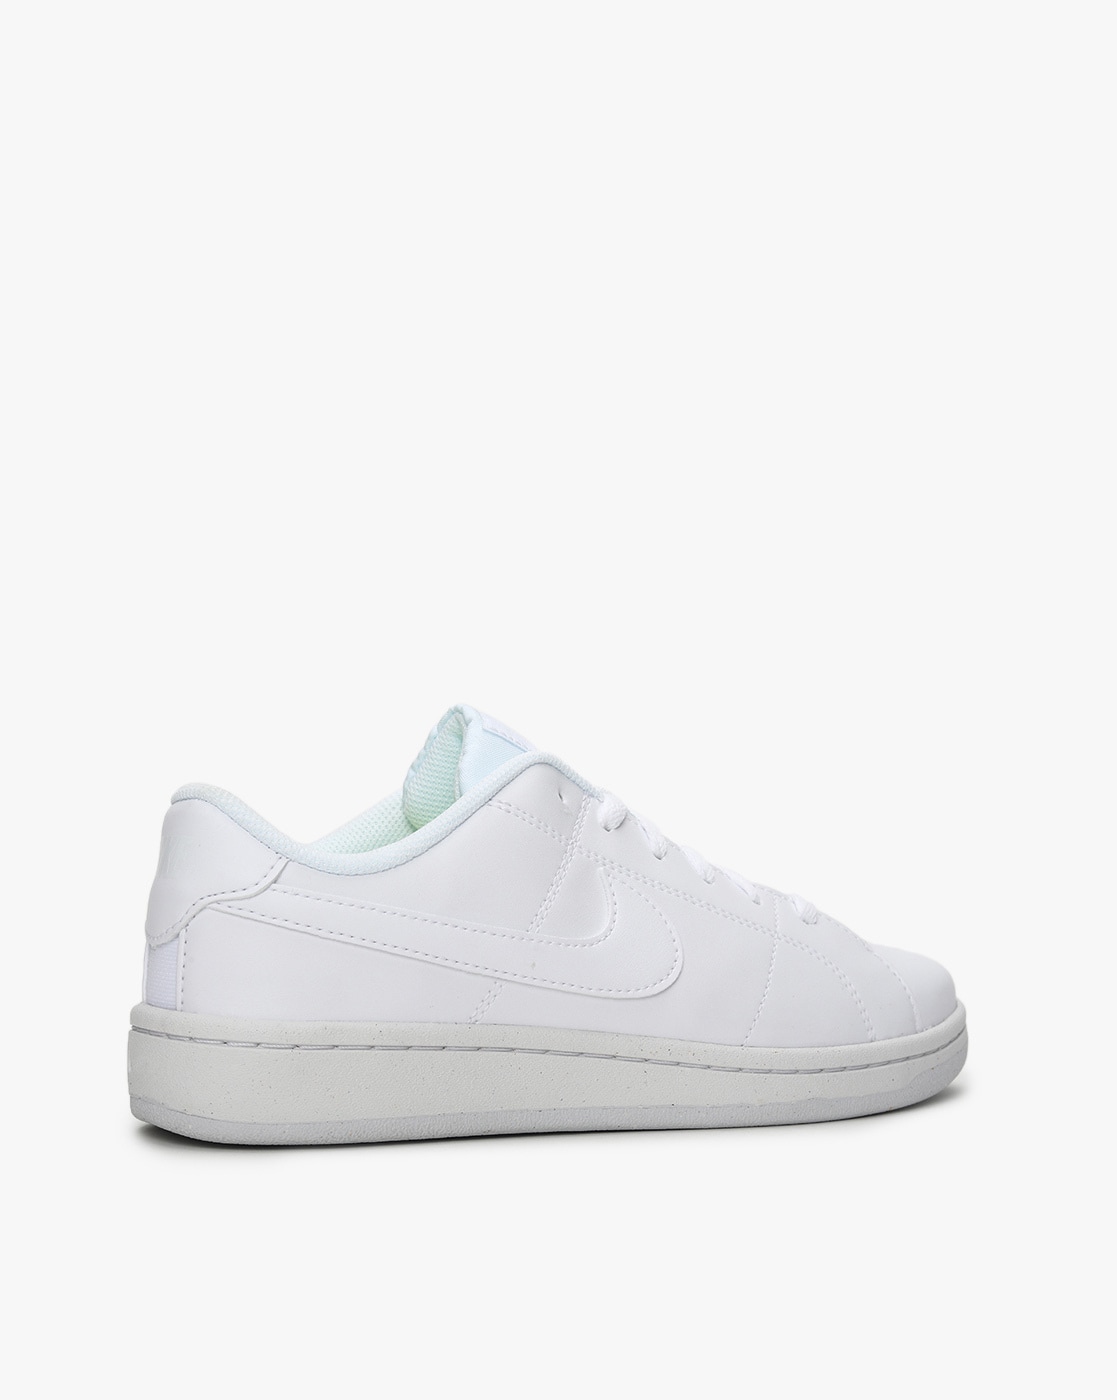 Everlane Court Sneaker Review: How They Fit and Feel